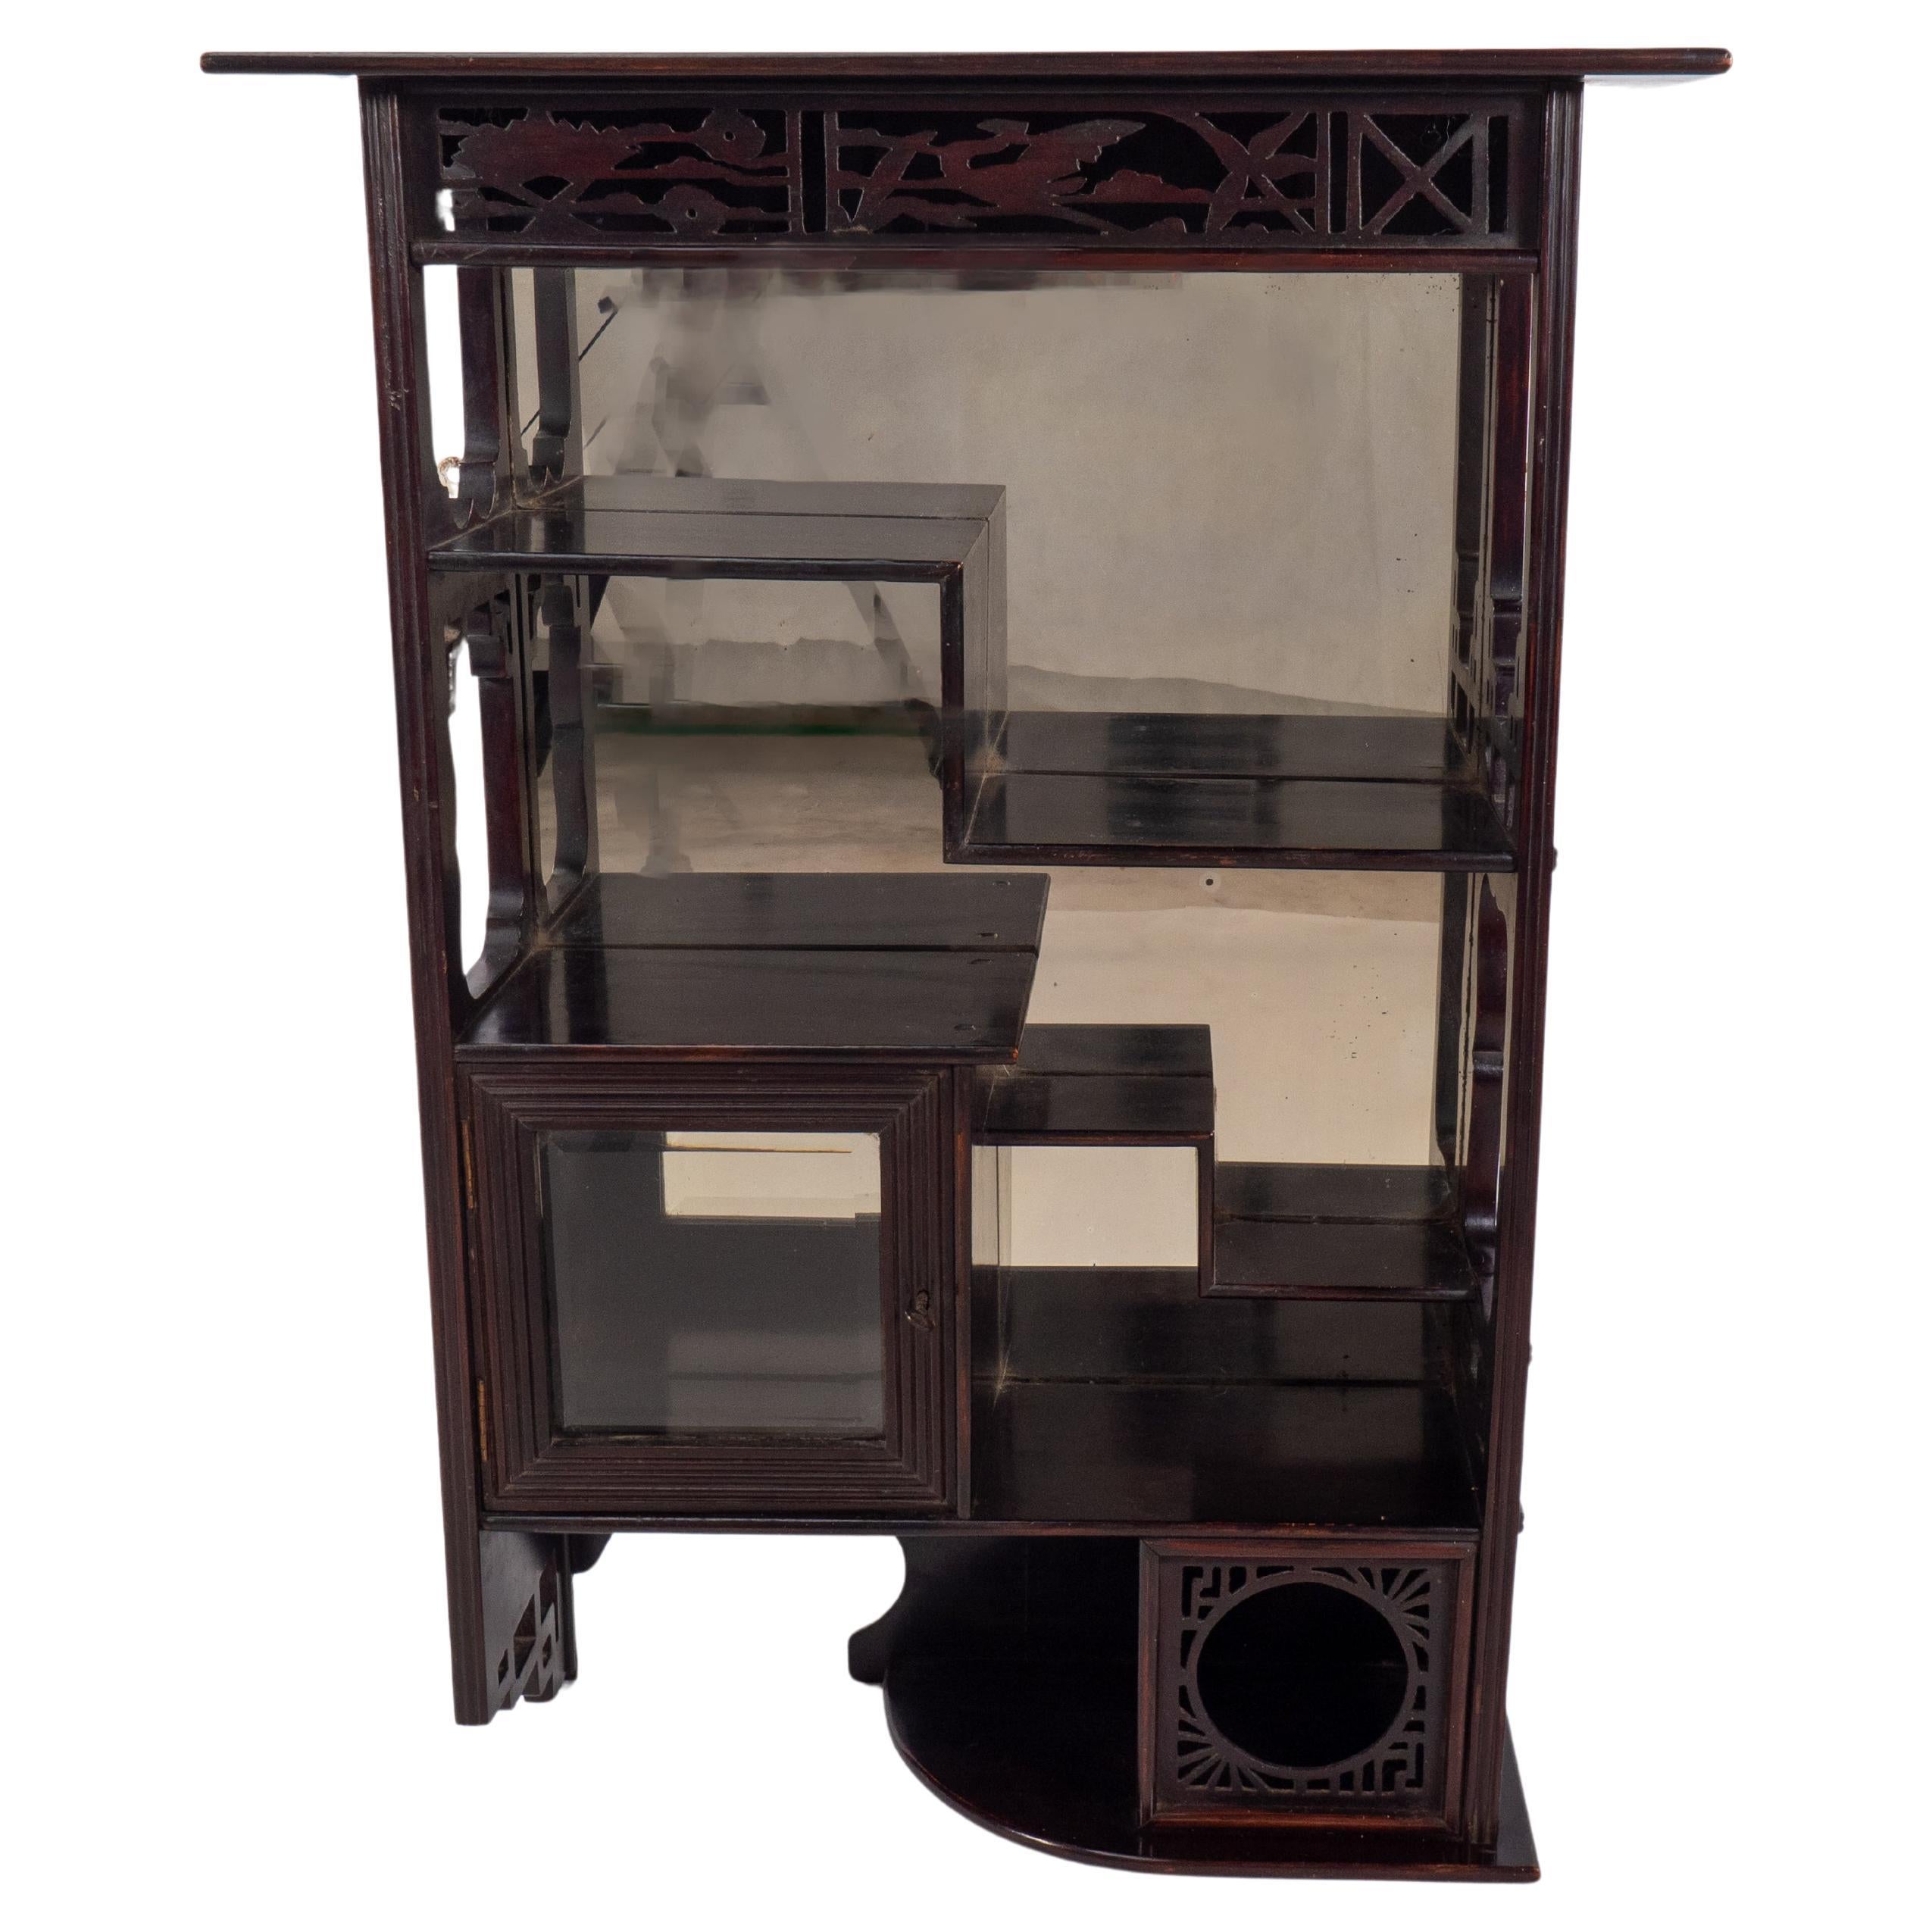 Heals and Son. An Anglo-japanese Aesthetic Movement set of ebonized wall shelves For Sale